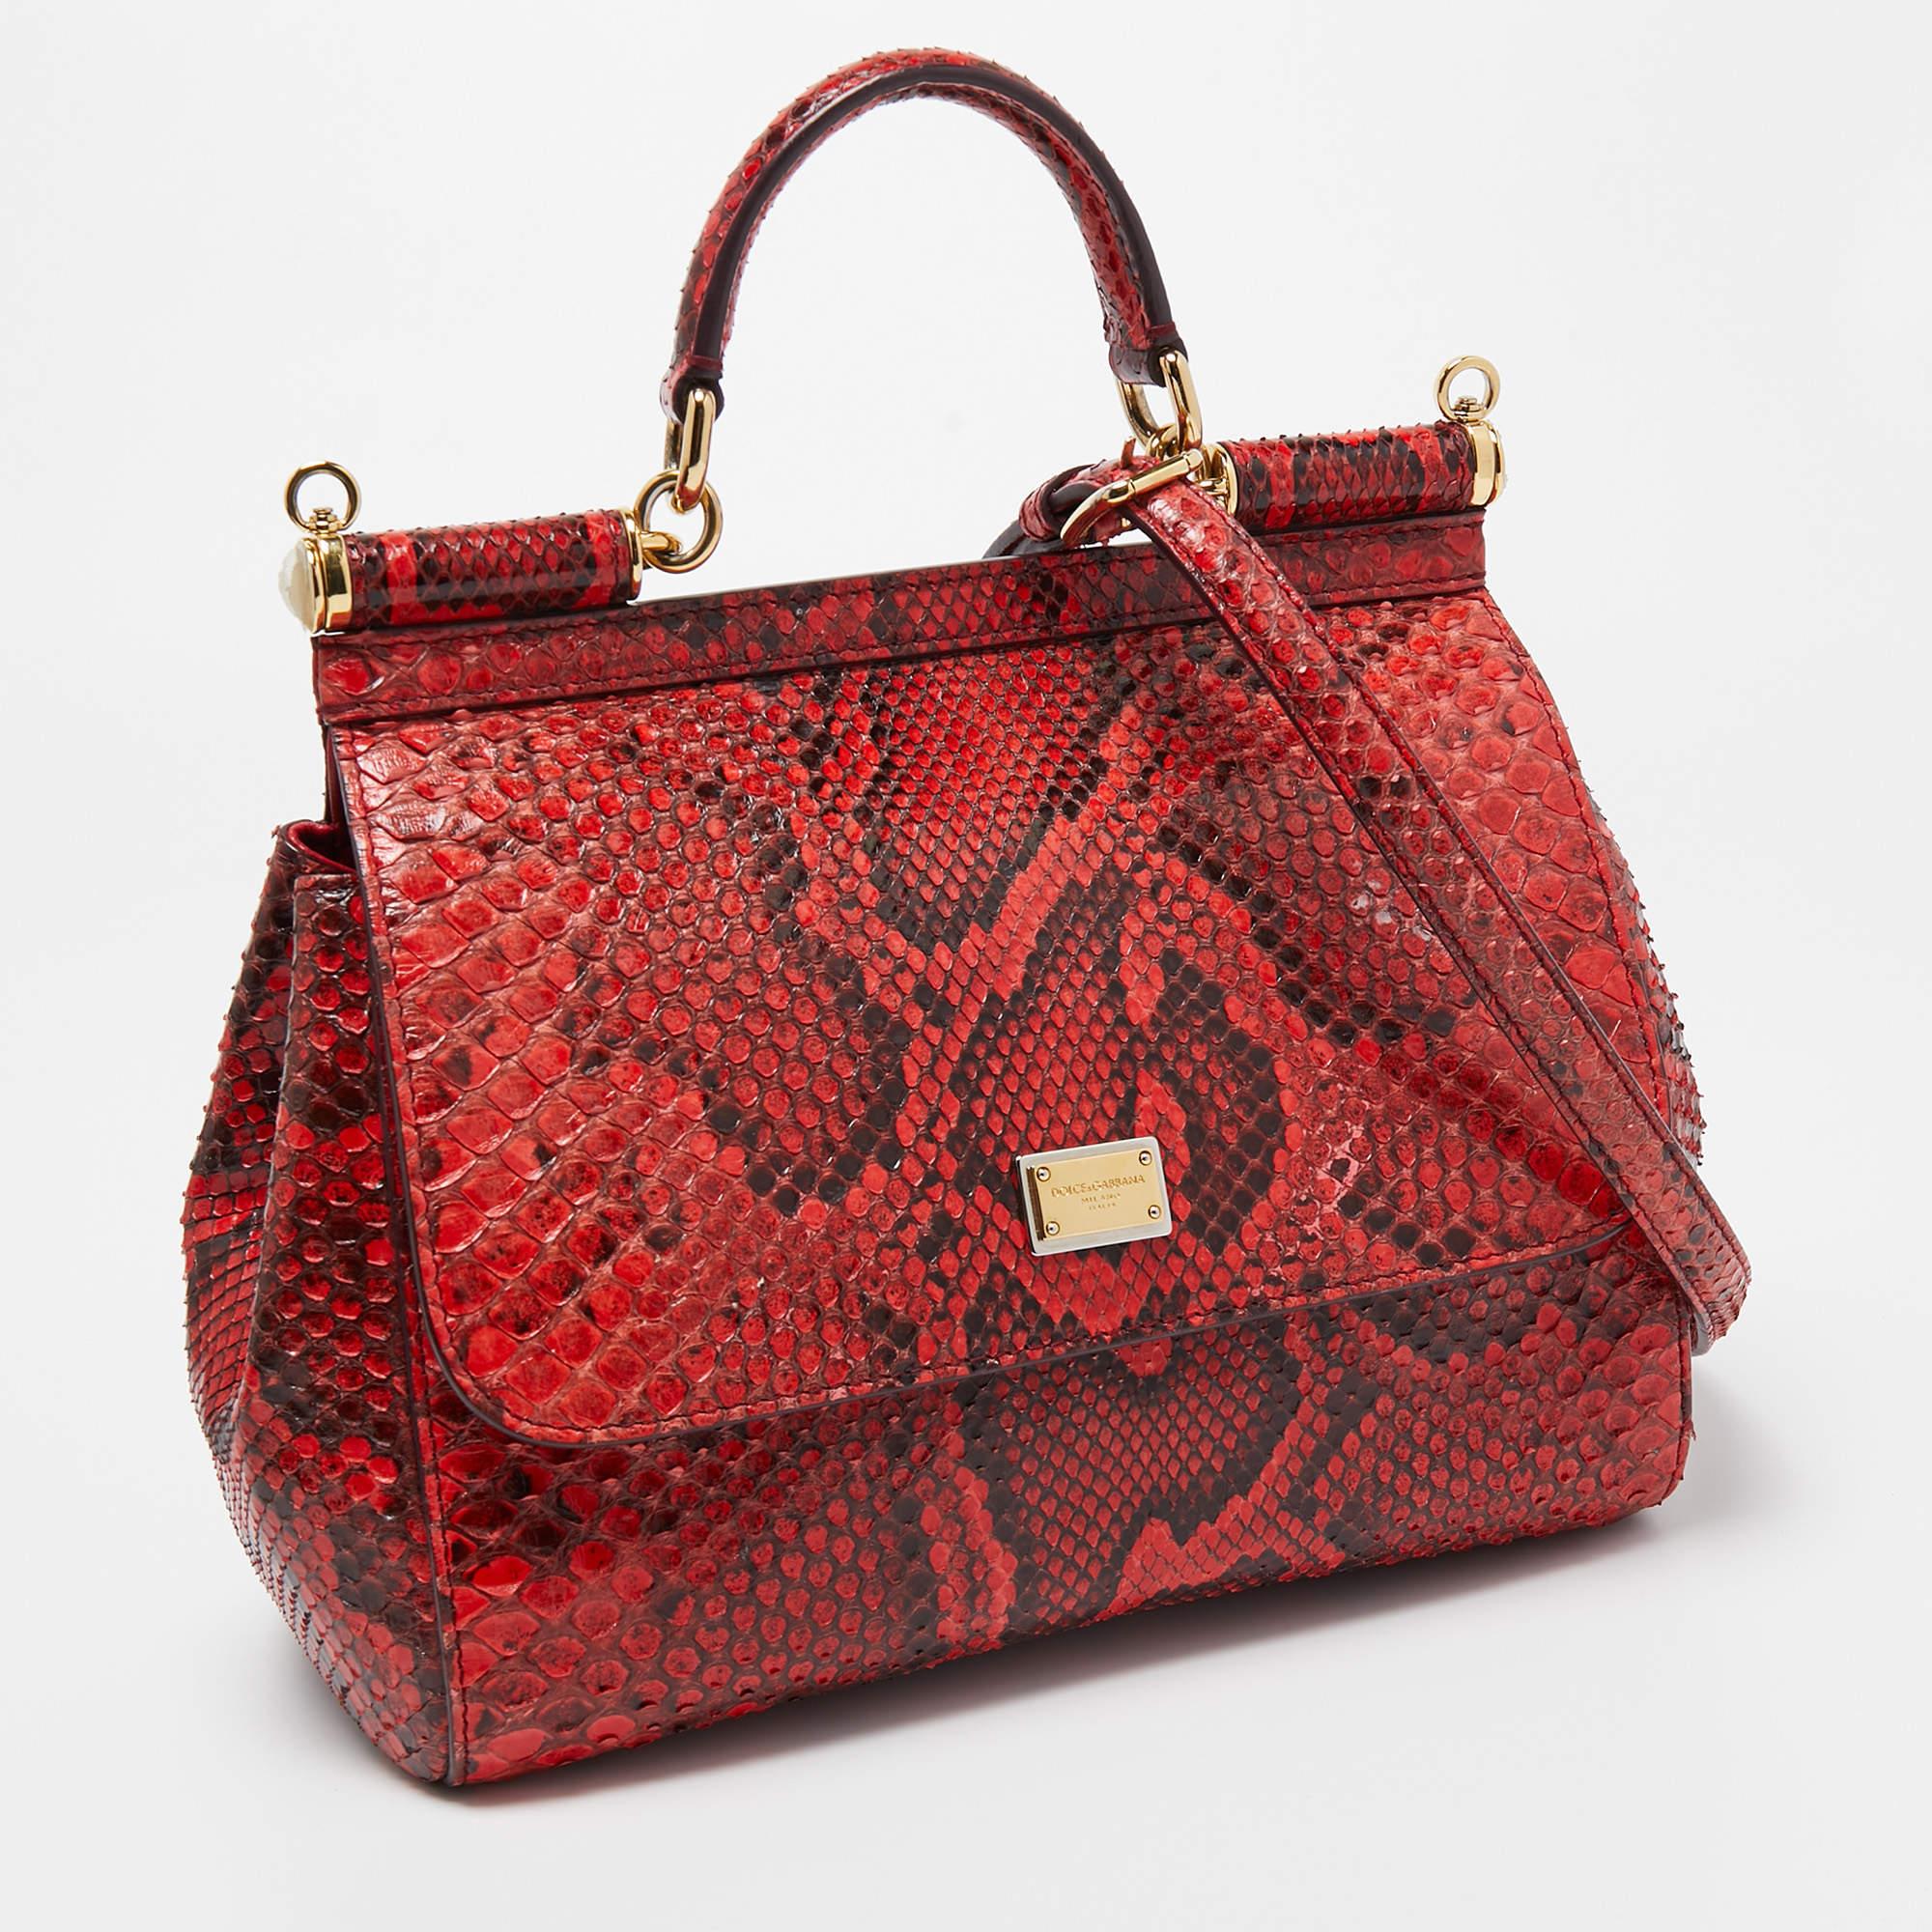 Presented for the 2009 Fall/Winter collection, Miss Sicily from Dolce & Gabbana represents the brand's regard for Italian essence and feminine style. This burgundy creation comes made from python skin and can be carried conveniently by a top handle